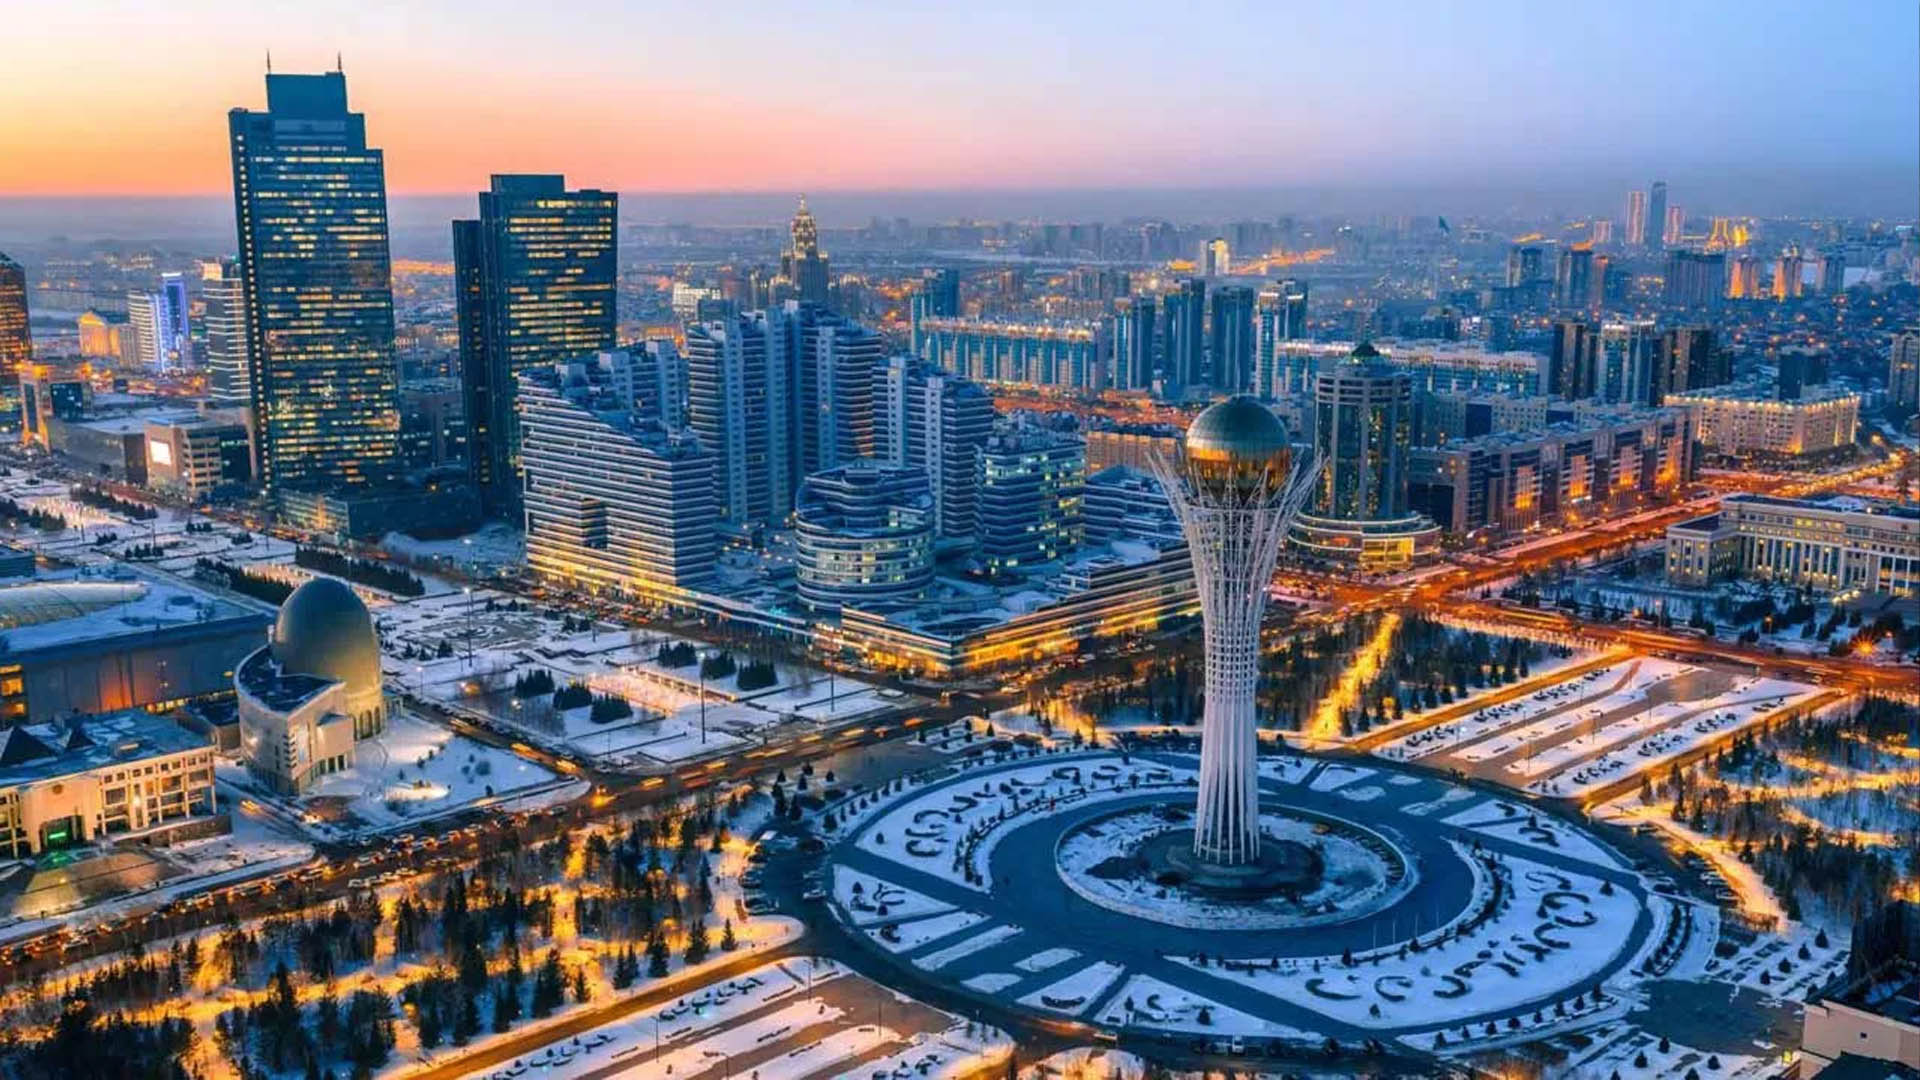 World Bank approves $600M loan to promote sustainable economic growth in Kazakhstan